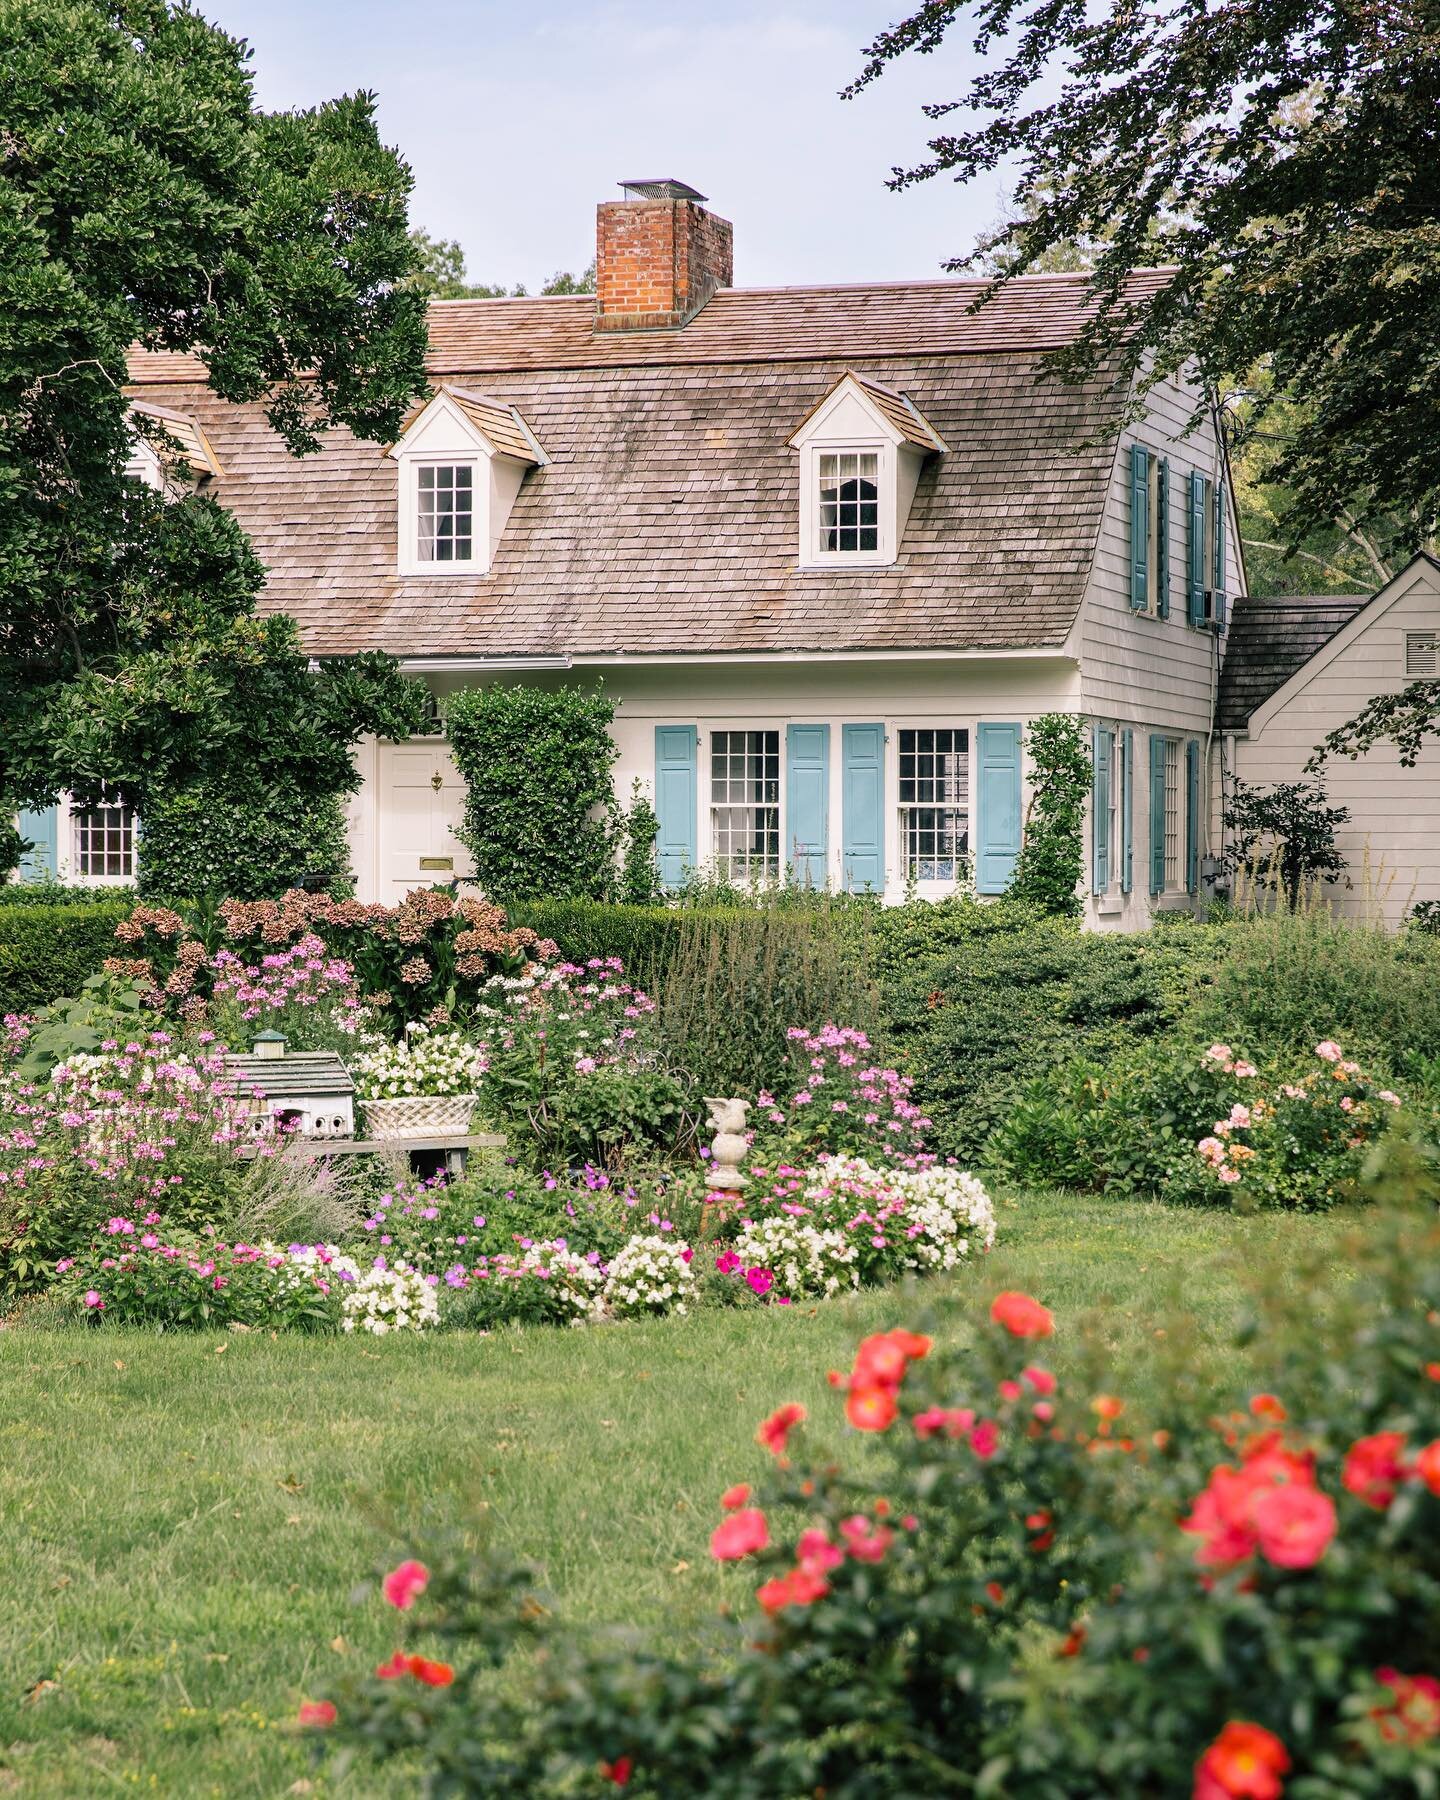 on a quick impromptu day trip to connecticut, i stumbled upon the most charming home worthy of a fairytale. the owner, marlene, was outside gardening and i asked her if i could snap a photo of her home. not only was she so gracious in allowing me to 